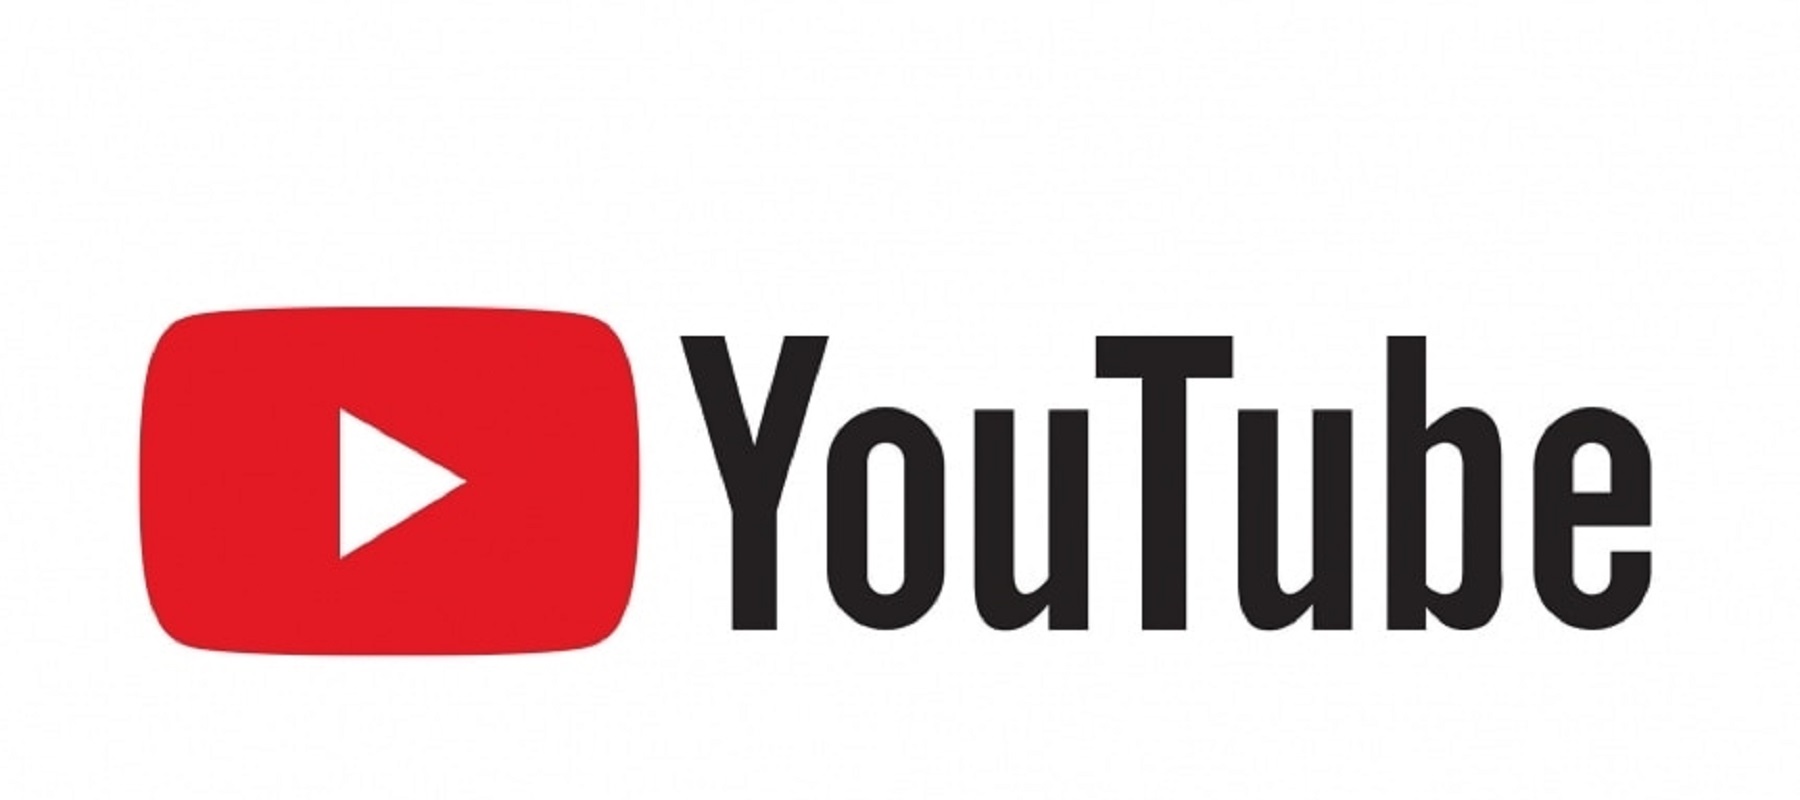 VideoAmp to measure deduplicated YouTube reach and frequency